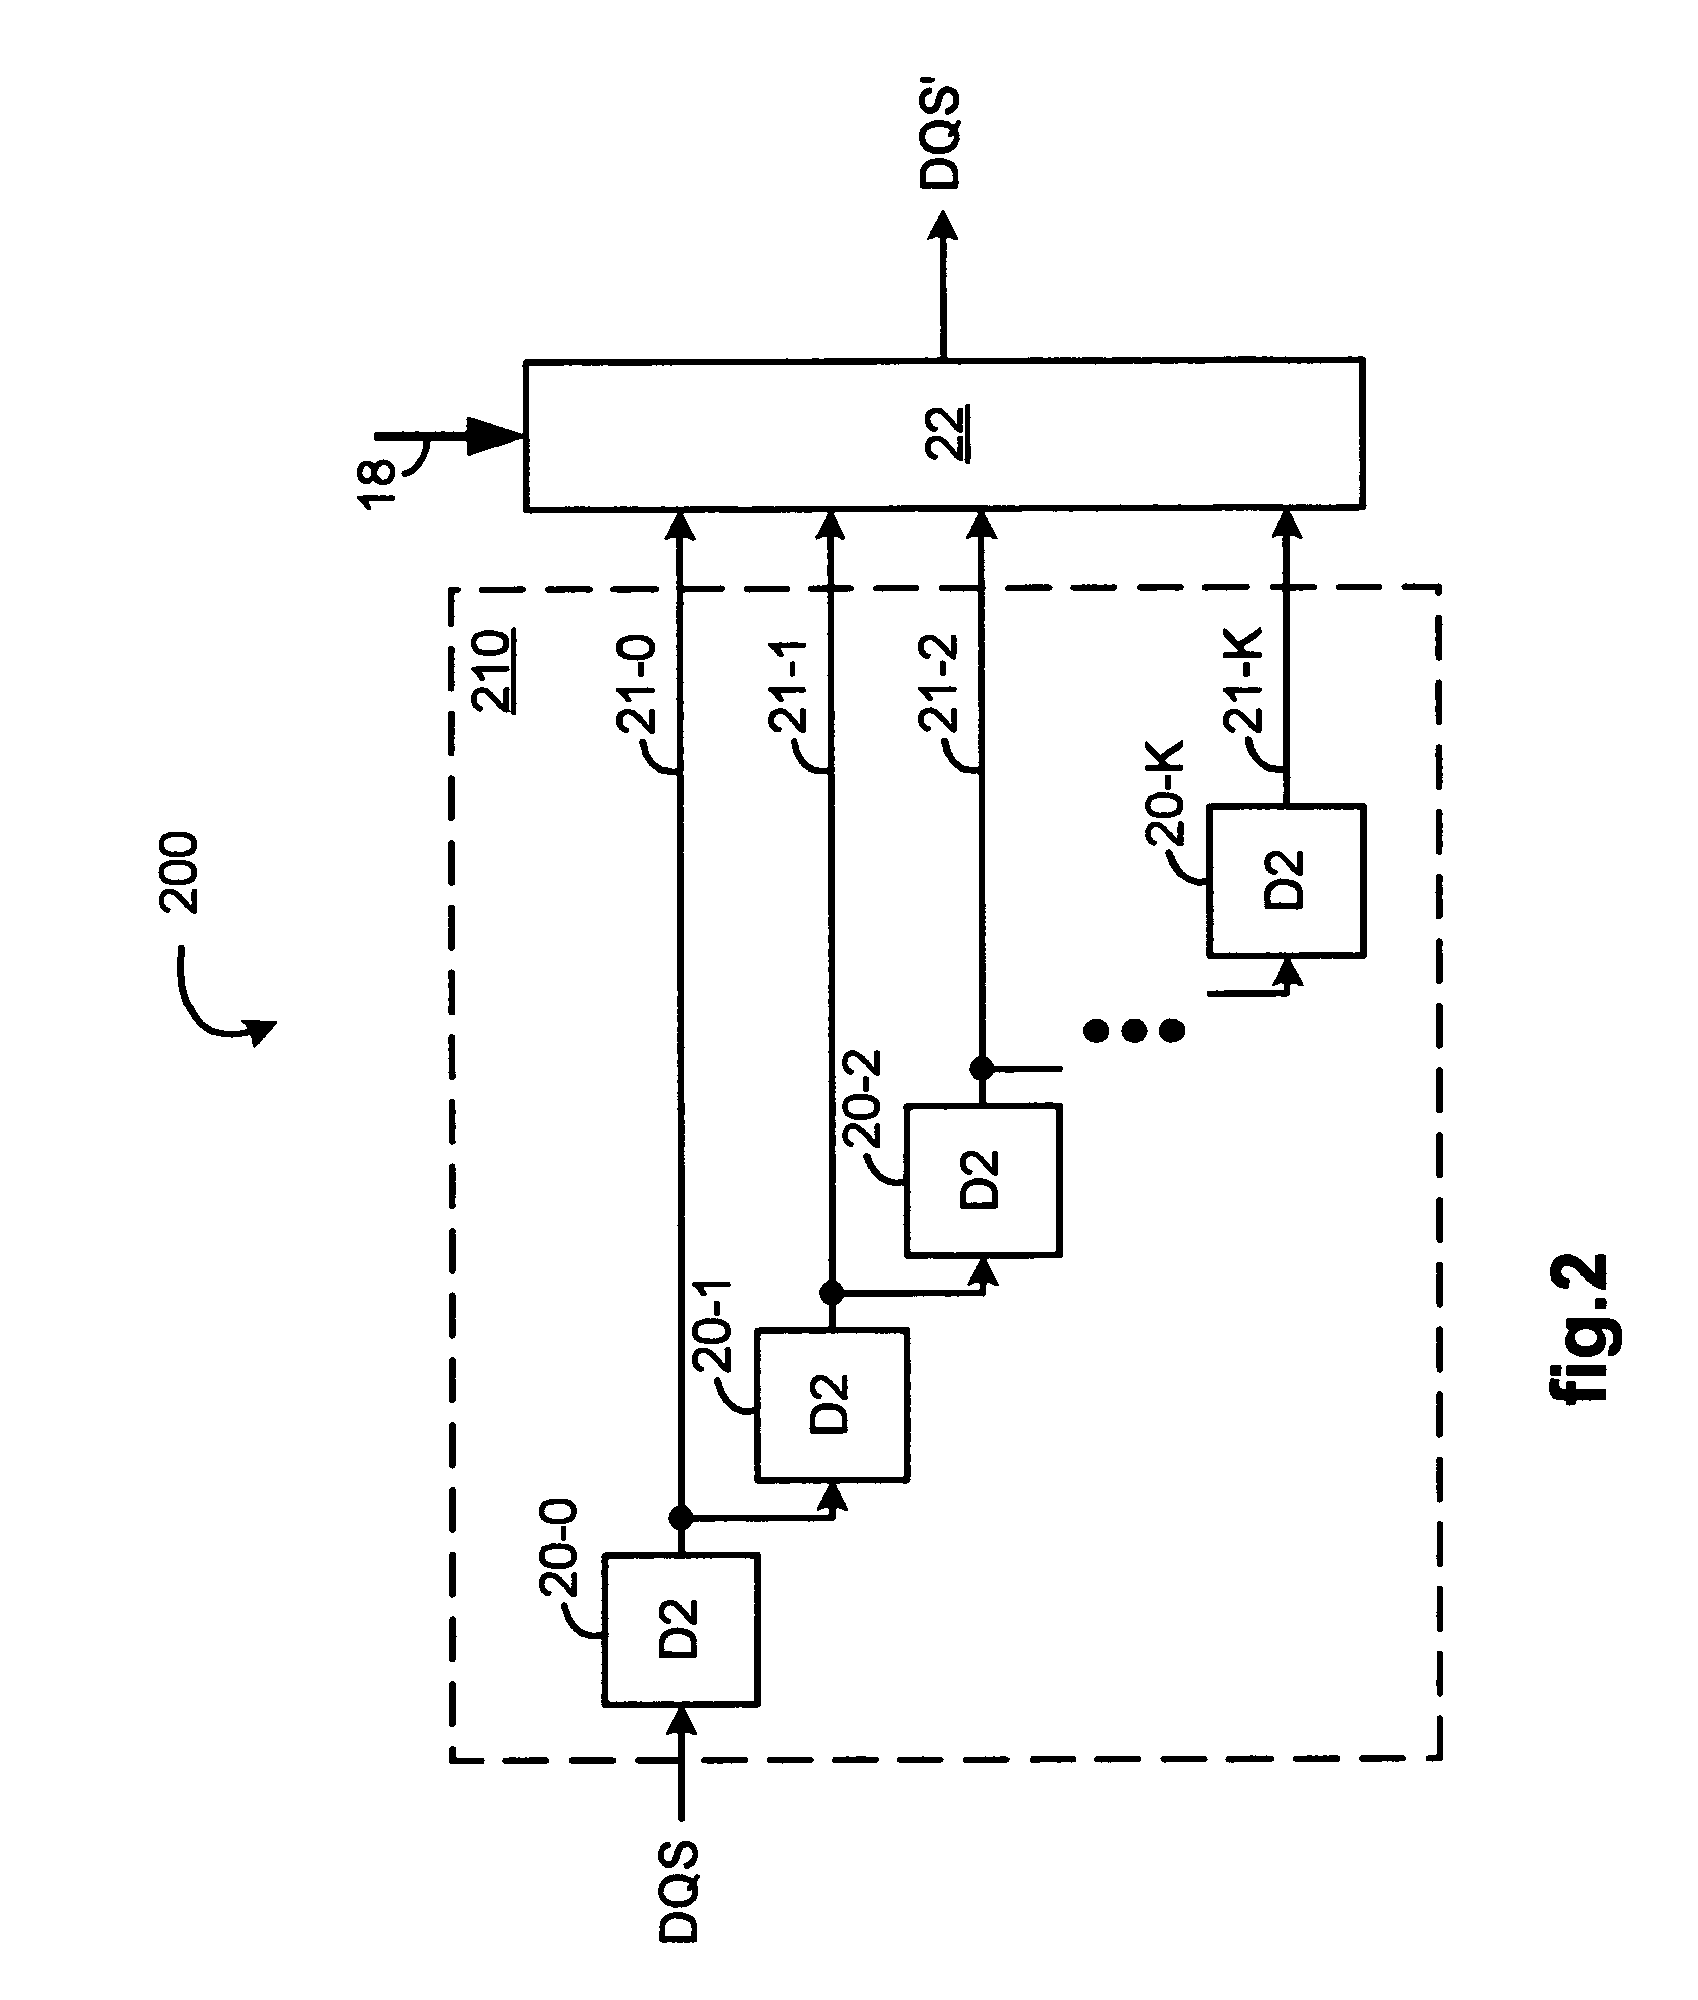 Clock processing logic and method for determining clock signal characteristics in reference voltage and temperature varying environments